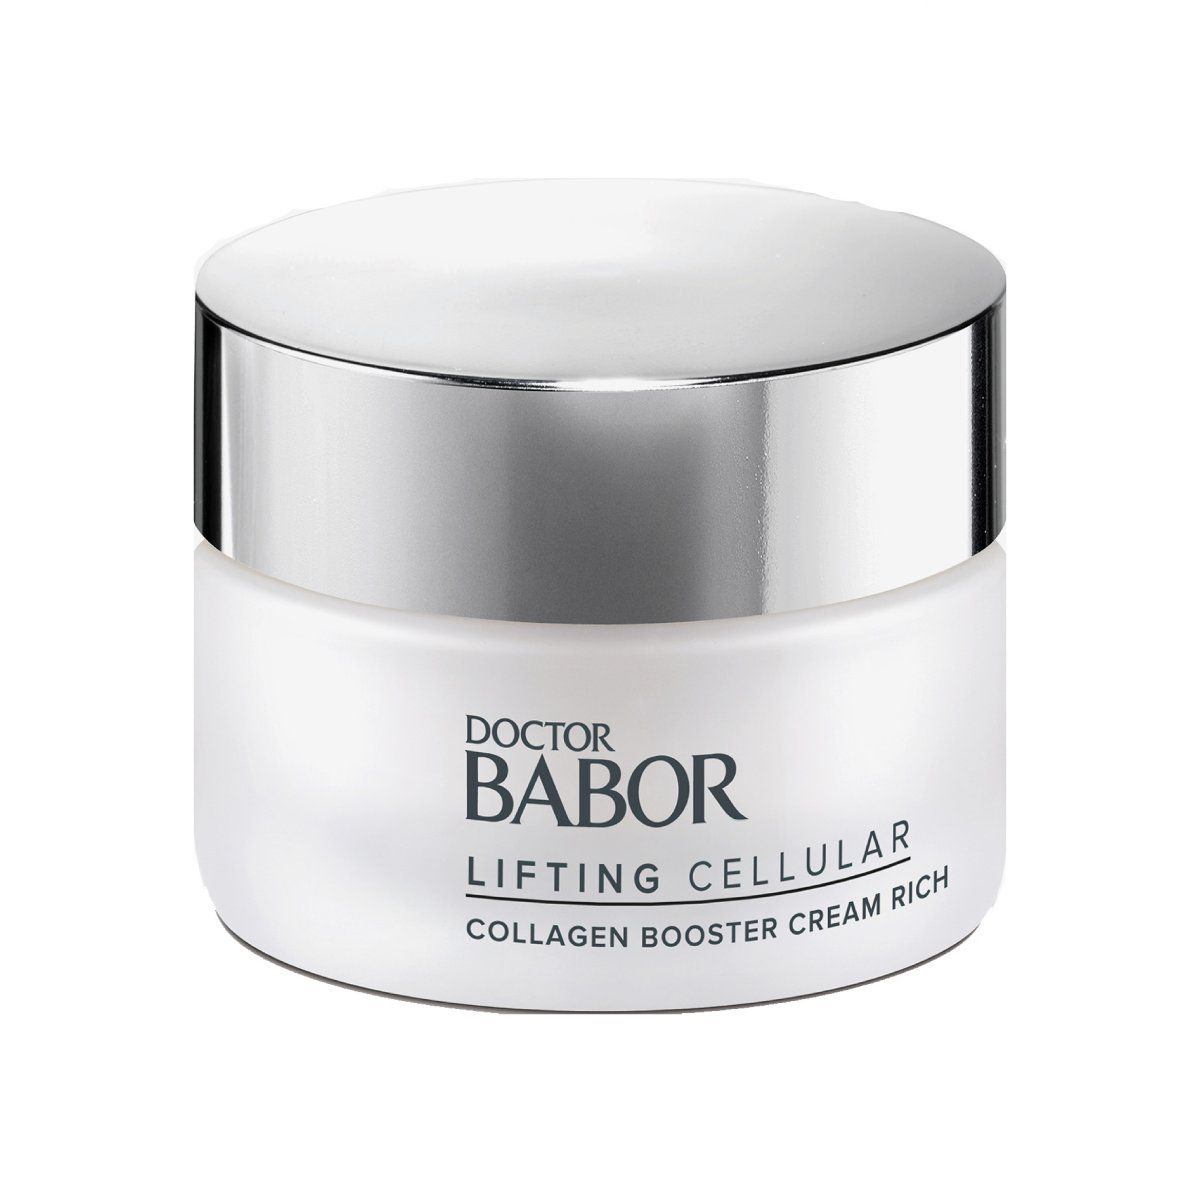 Doctor Babor Lifting Cellular Collagen Booster Cream 15ml